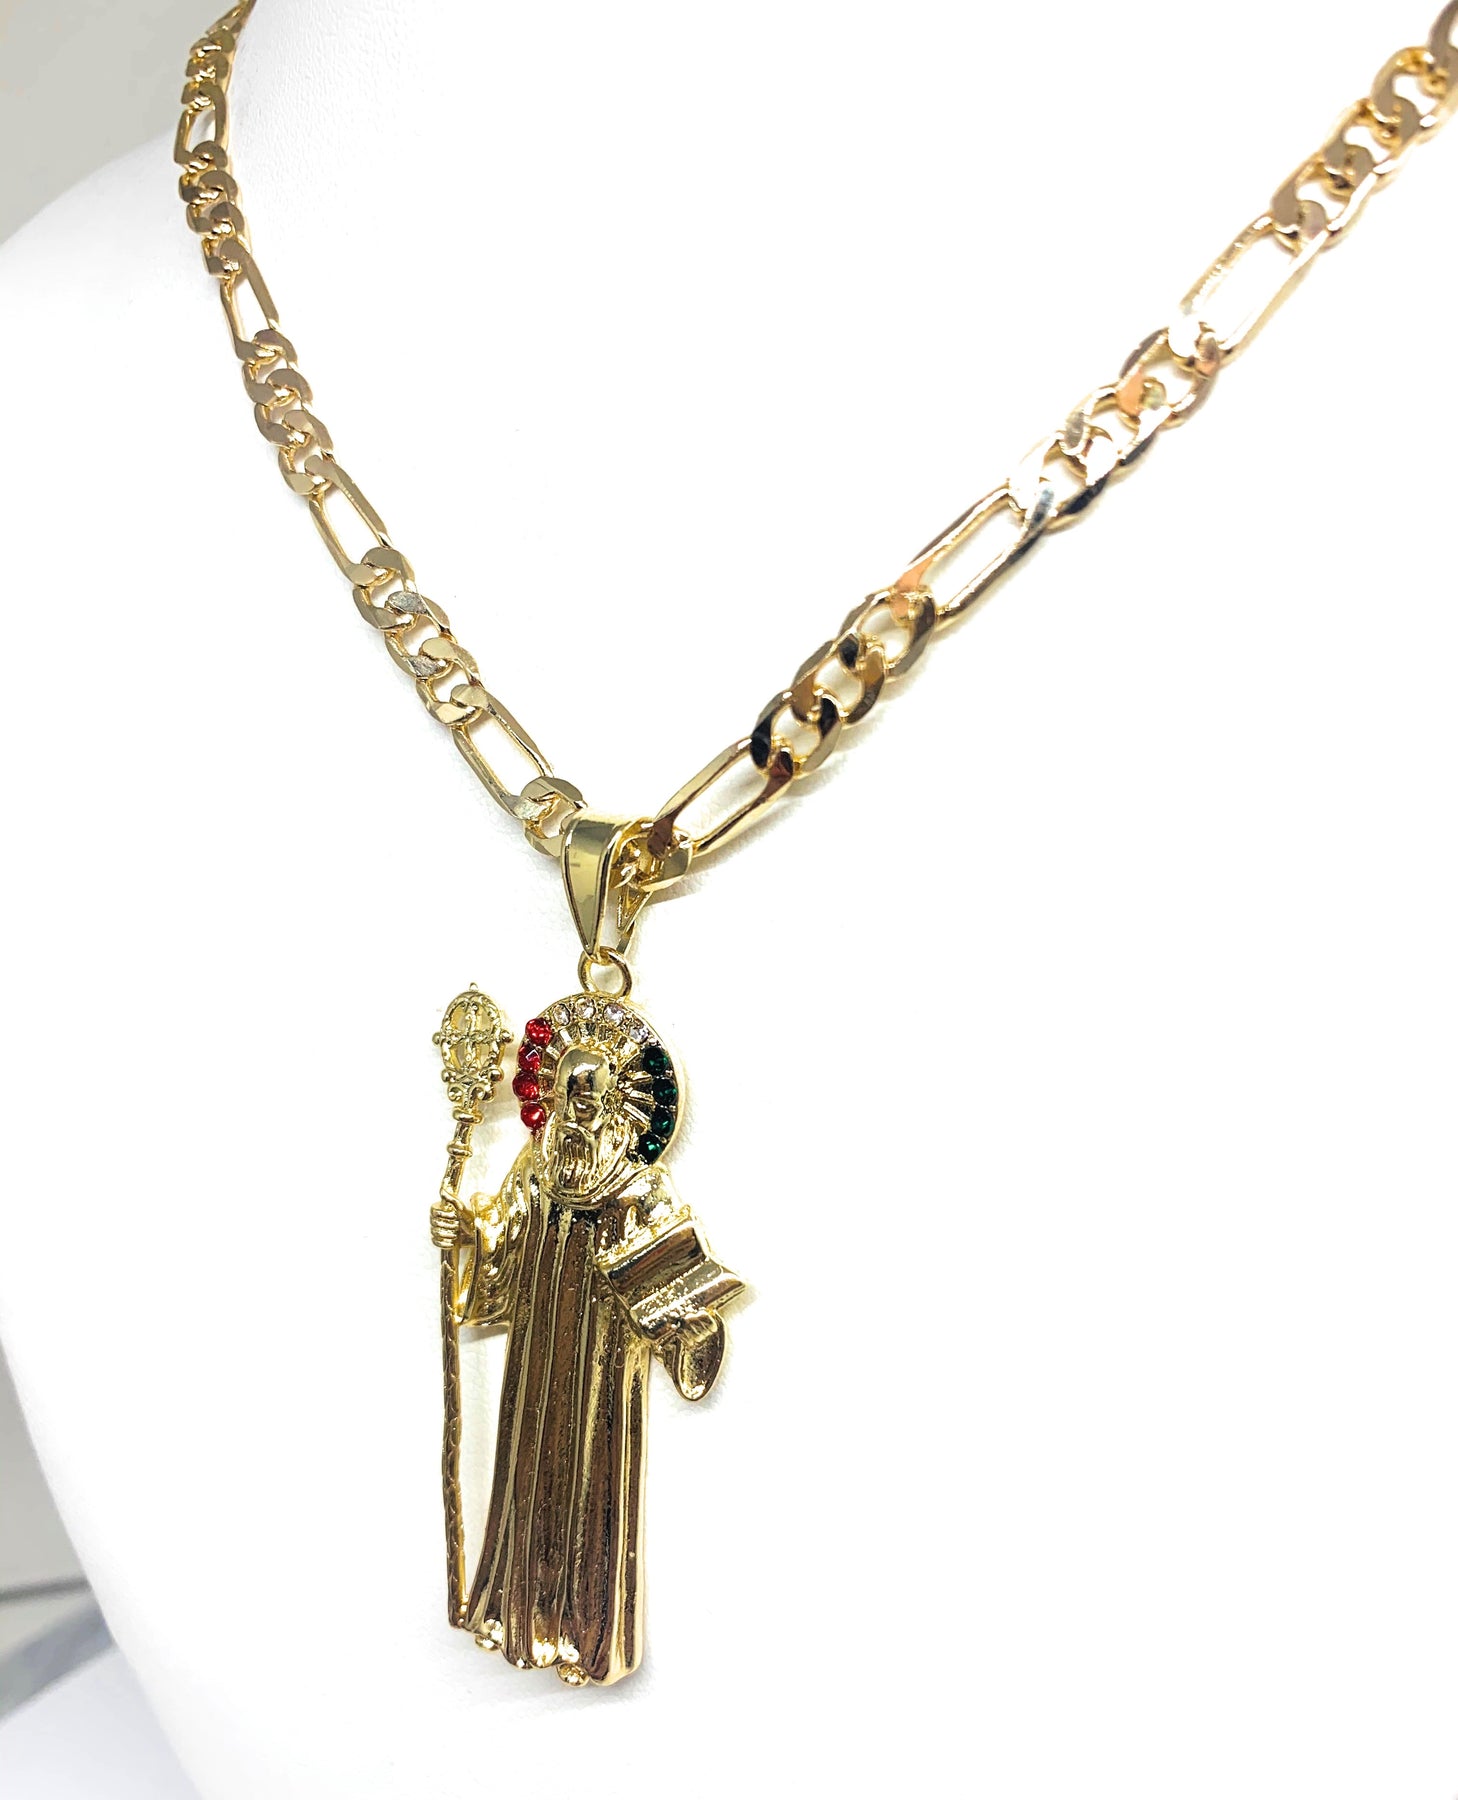 Gold Plated Saint Benedict Medal Pendant Necklace San Benito